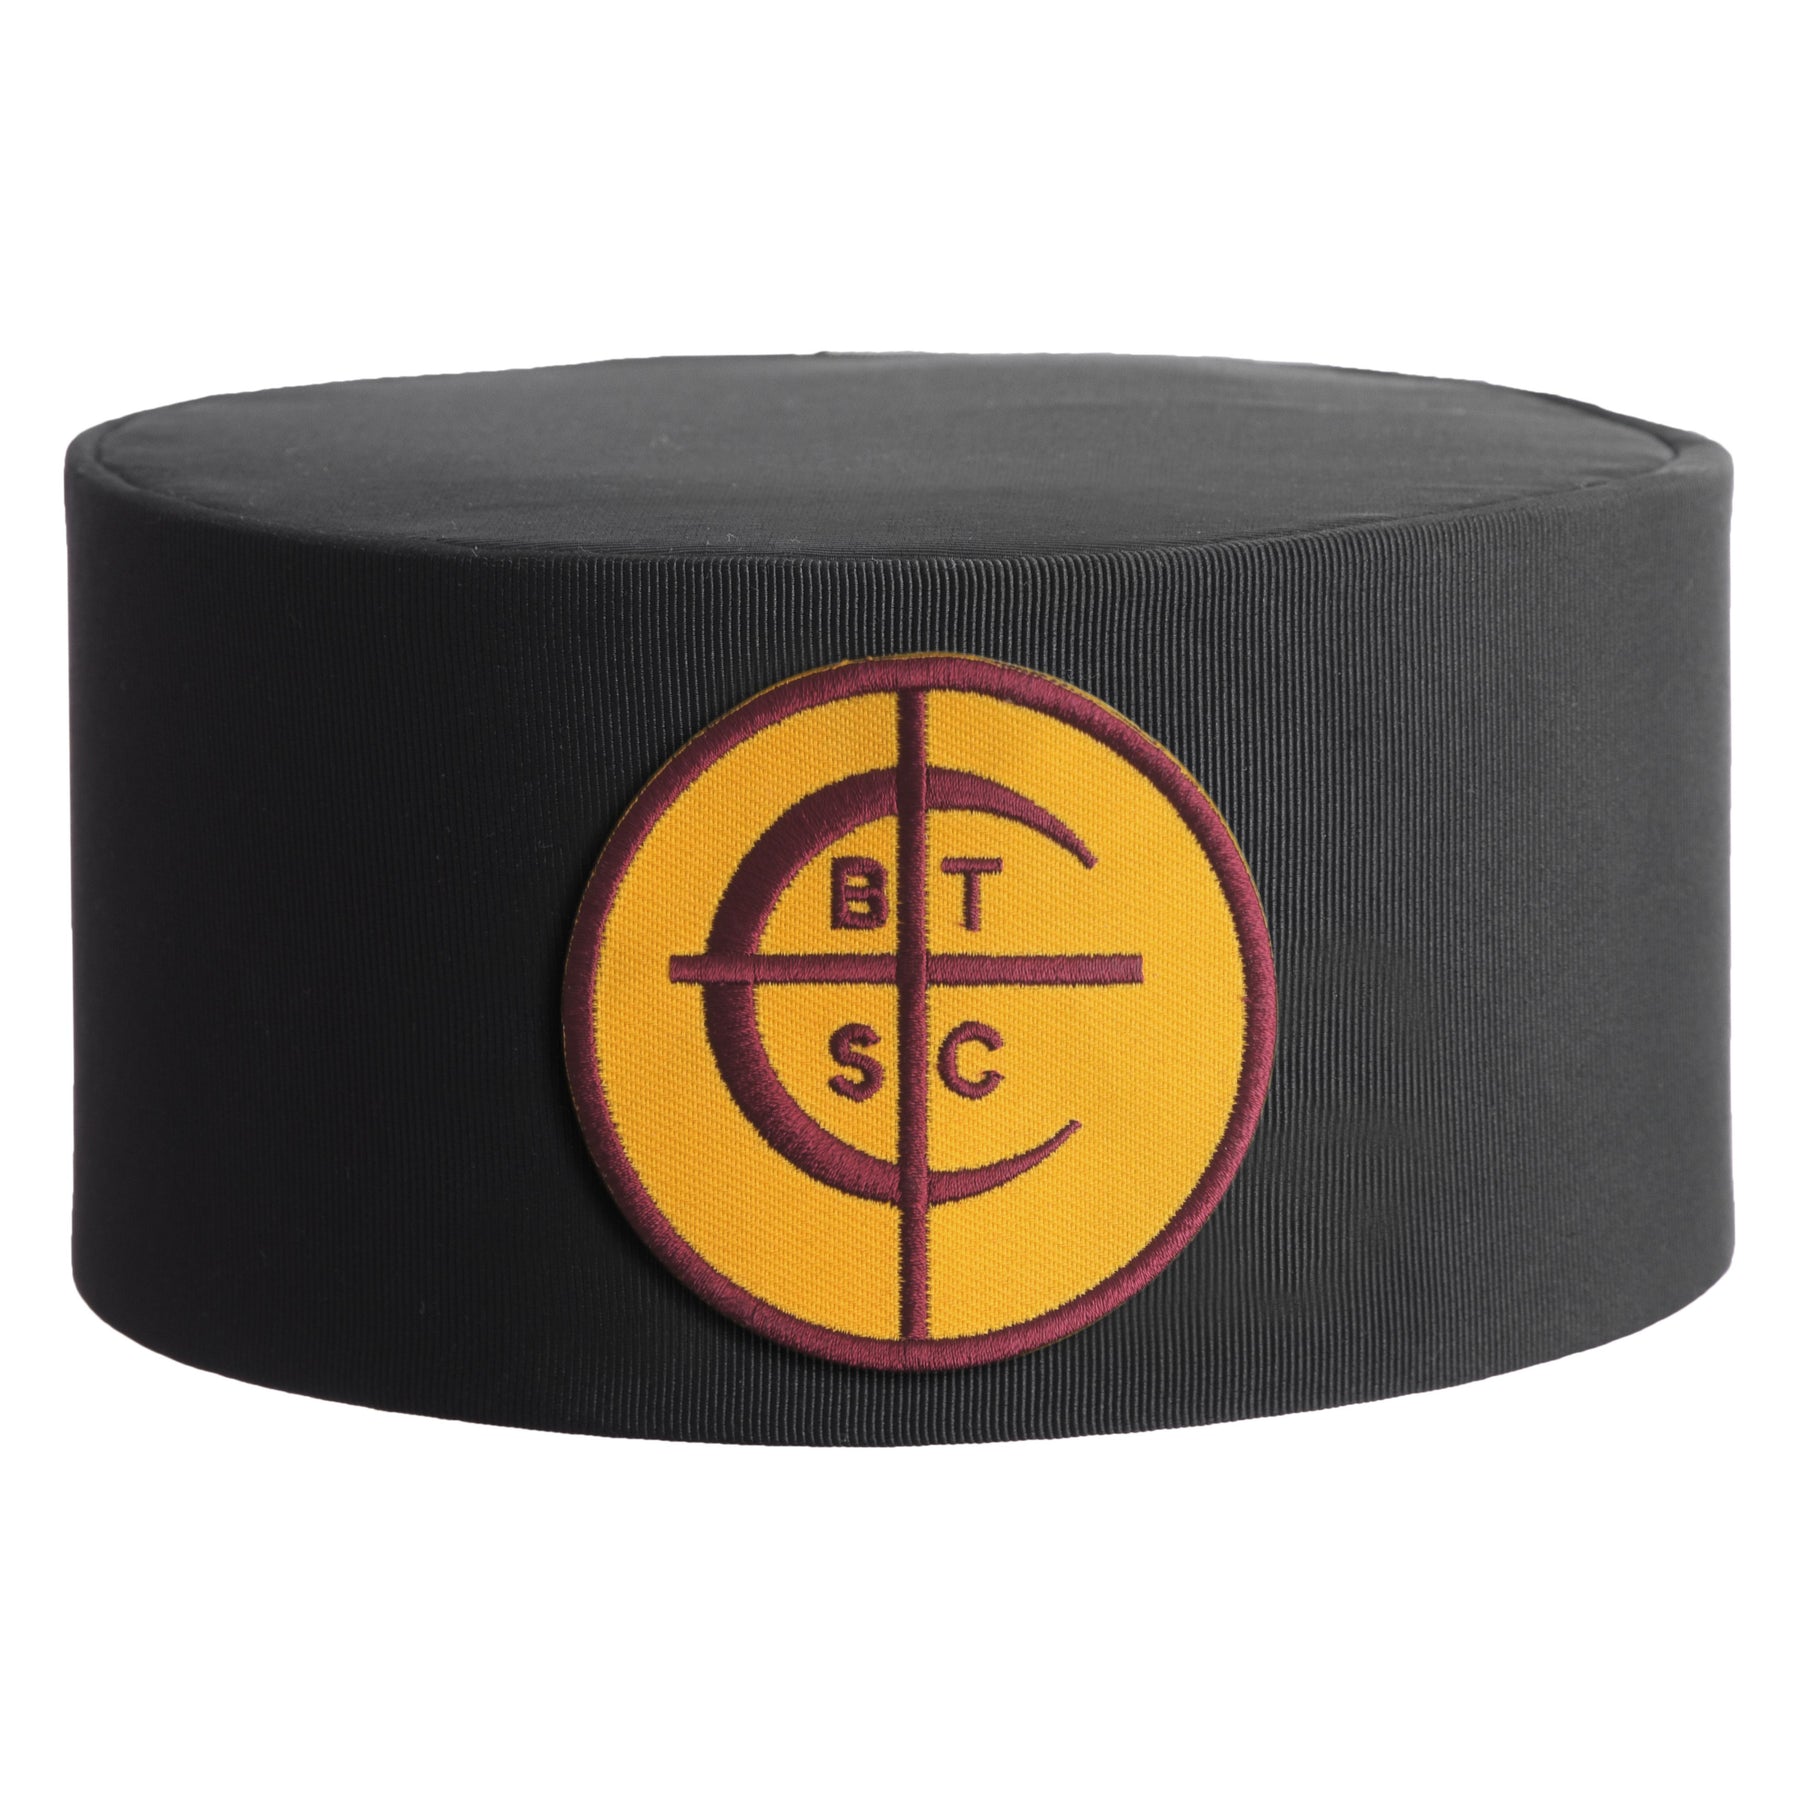 The Council Of Crusaders PHA Crown Cap - Black With Round Gold Patch - Bricks Masons